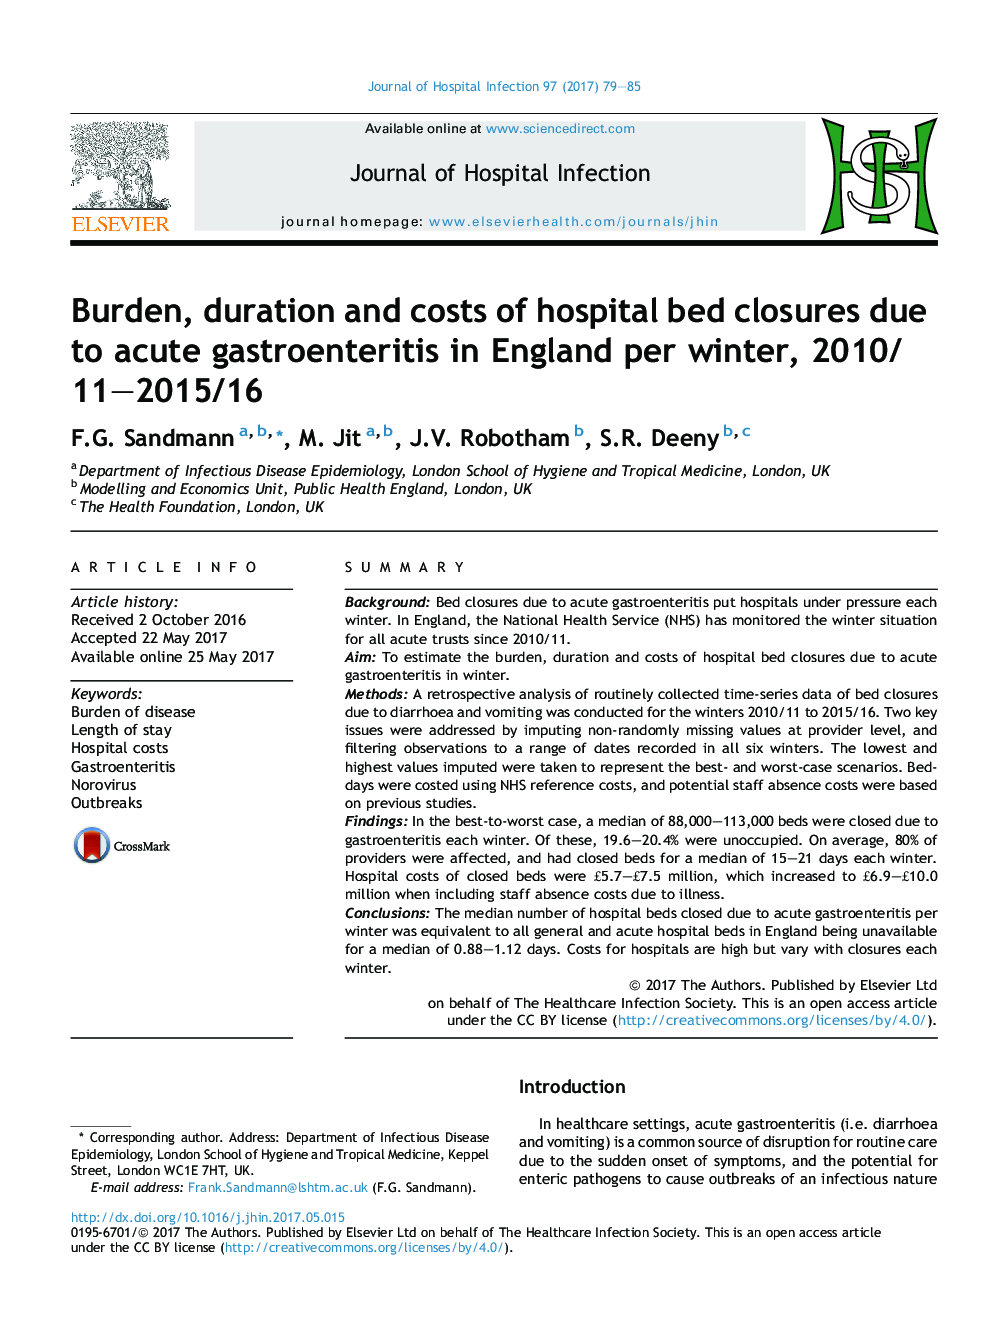 Burden, duration and costs of hospital bed closures due to acute gastroenteritis in England per winter, 2010/11-2015/16